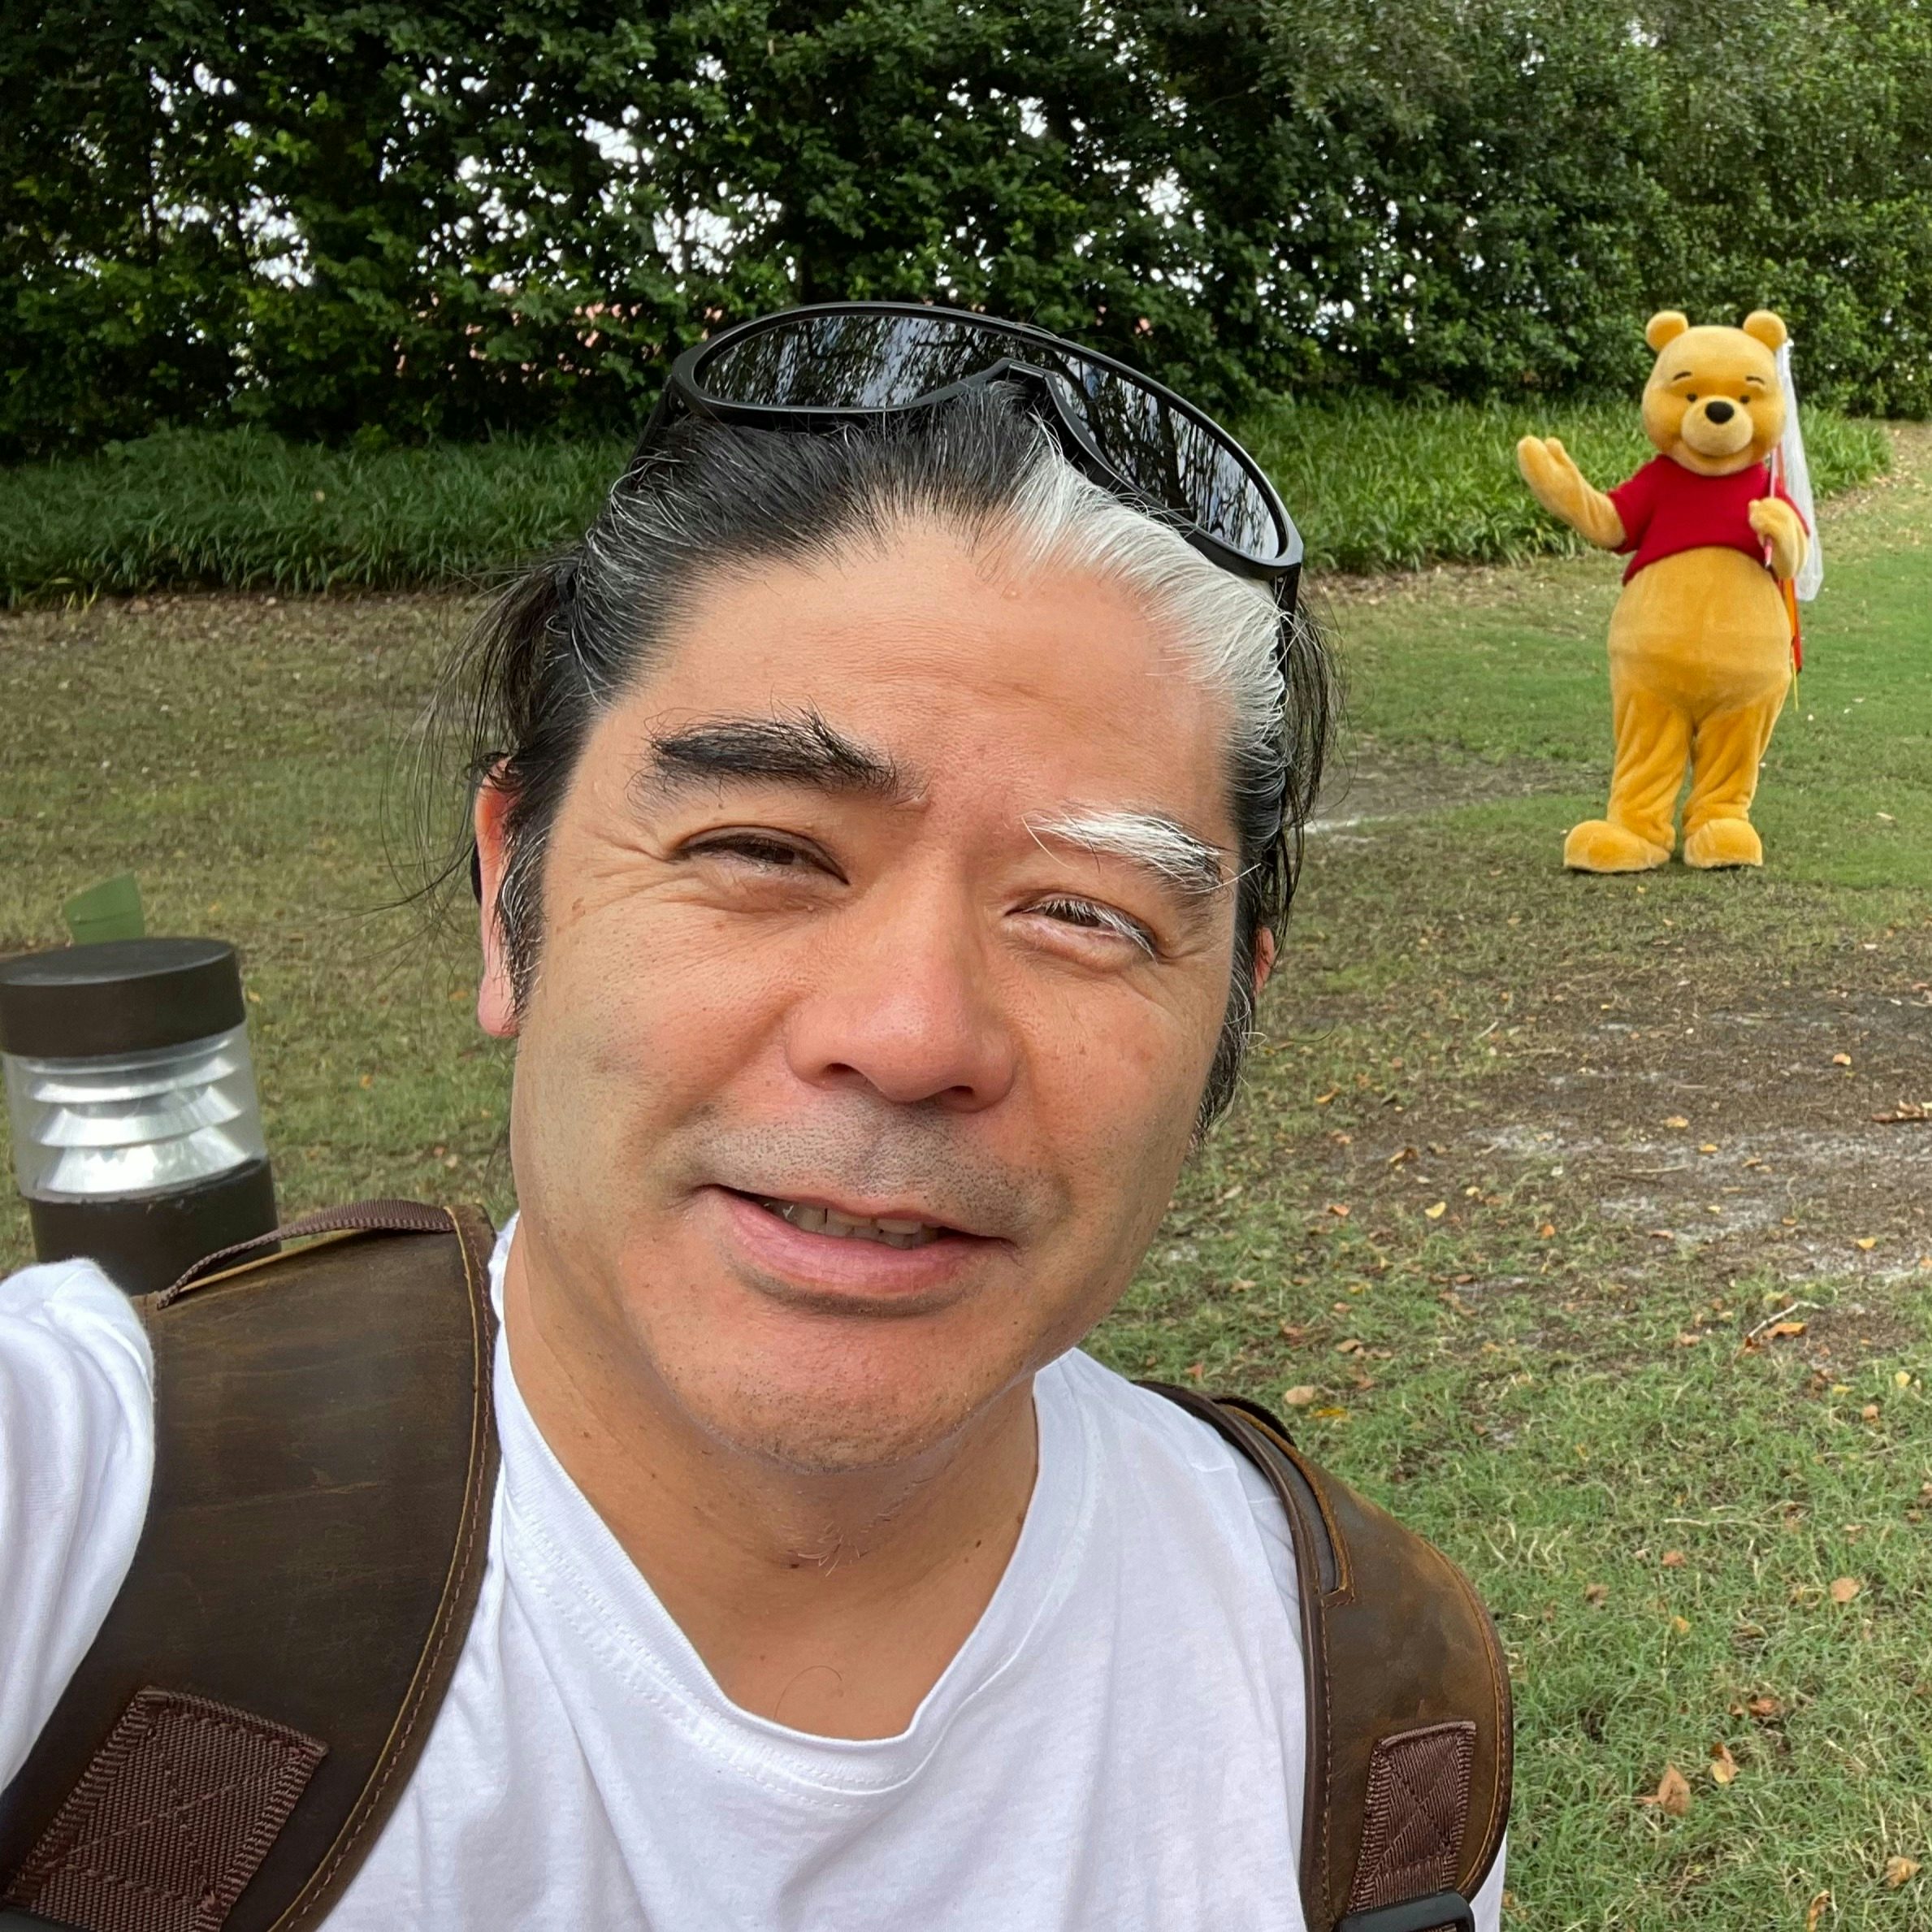 Travel Advisor Michael Kato with a white shirt and a yellow winnie the pooh bear standing behind him.